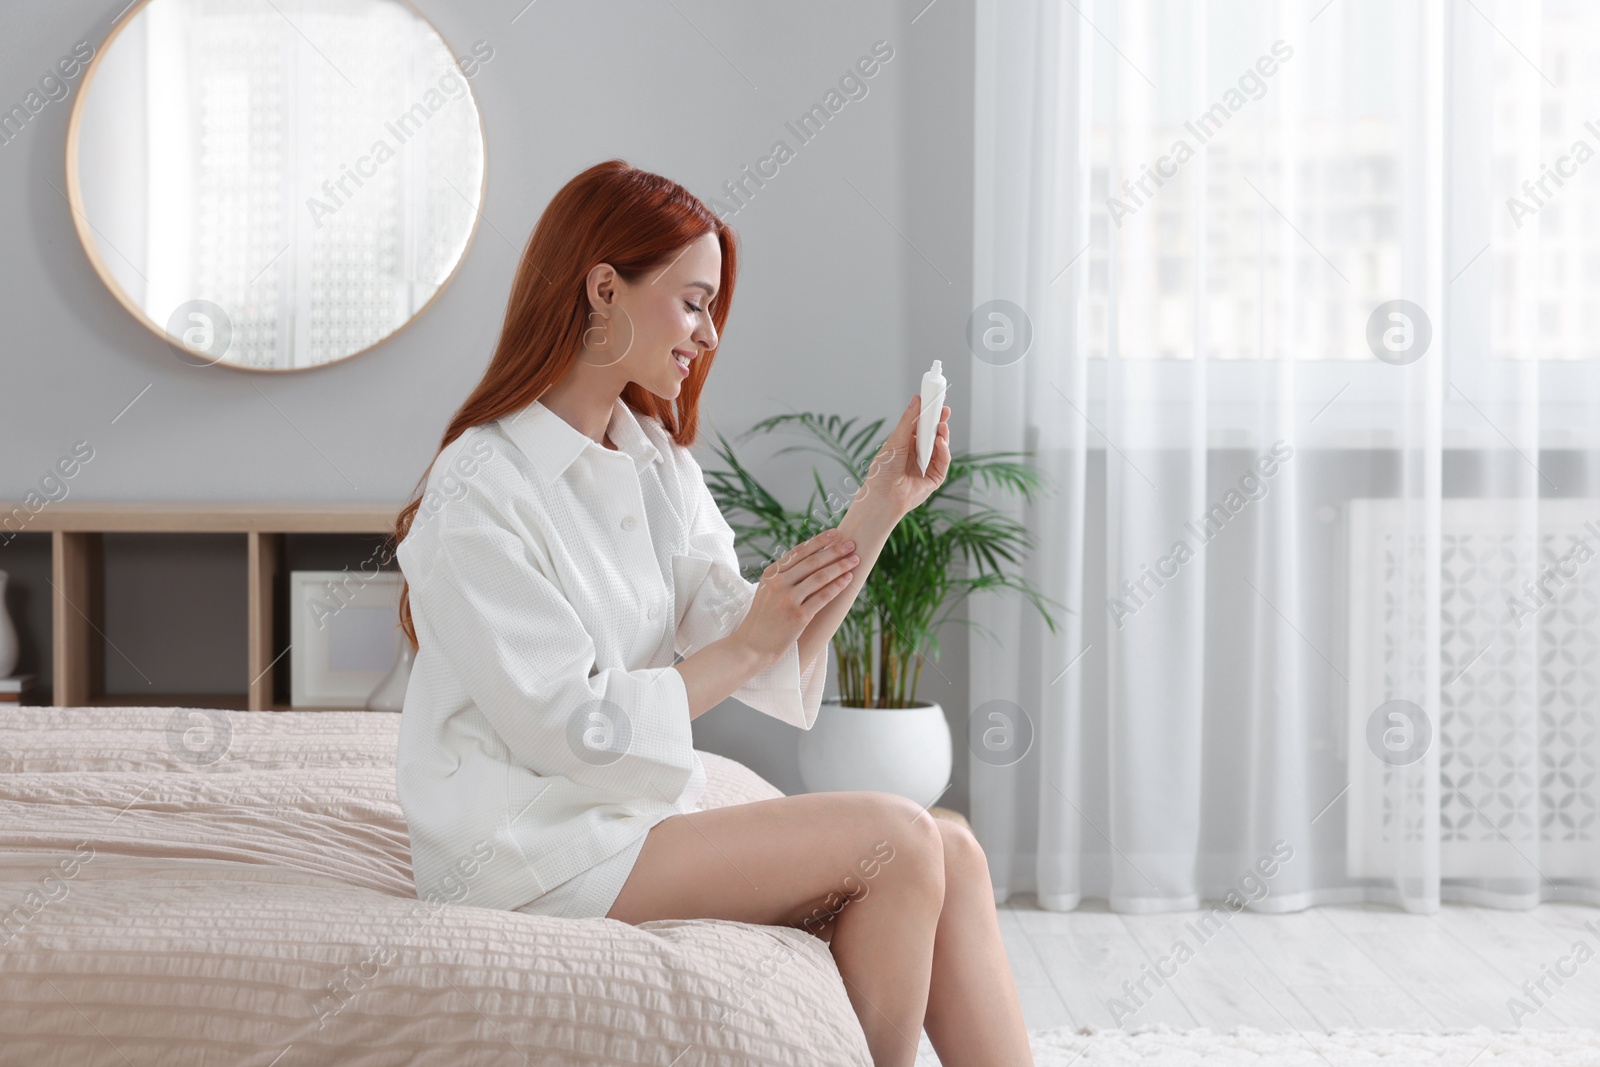 Photo of Beautiful young woman applying body cream onto arms in bedroom, space for text